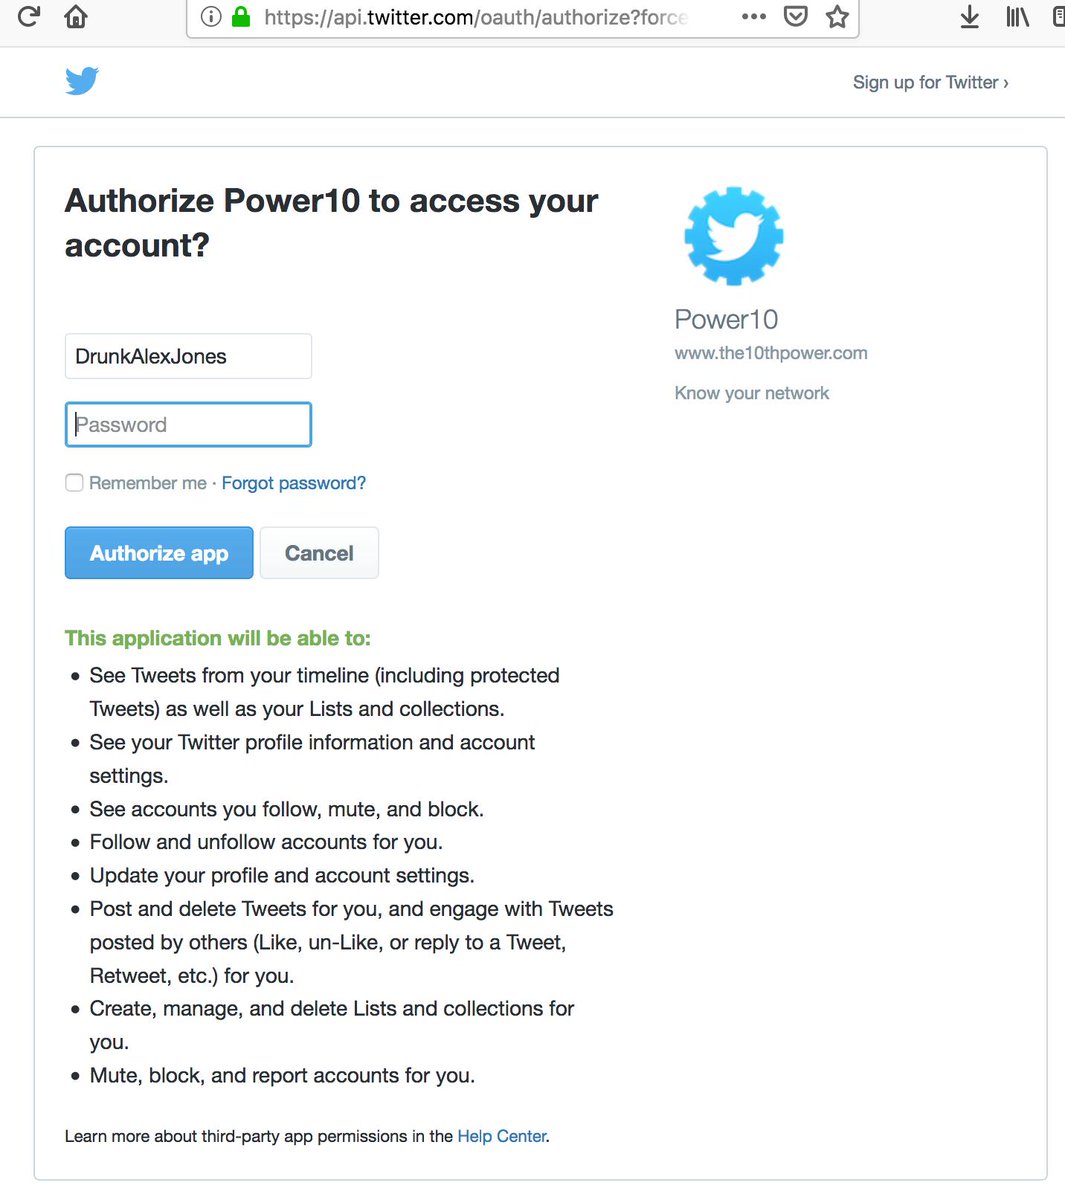 Power10 is a tool that automatically retweets accounts of your choice. It requests pretty comprehensive access to your account, so we had  @DrunkAlexJones try it in a controlled environment. (It also has a bulk follow feature, which Alex did not test due to fear of breaching TOS.)